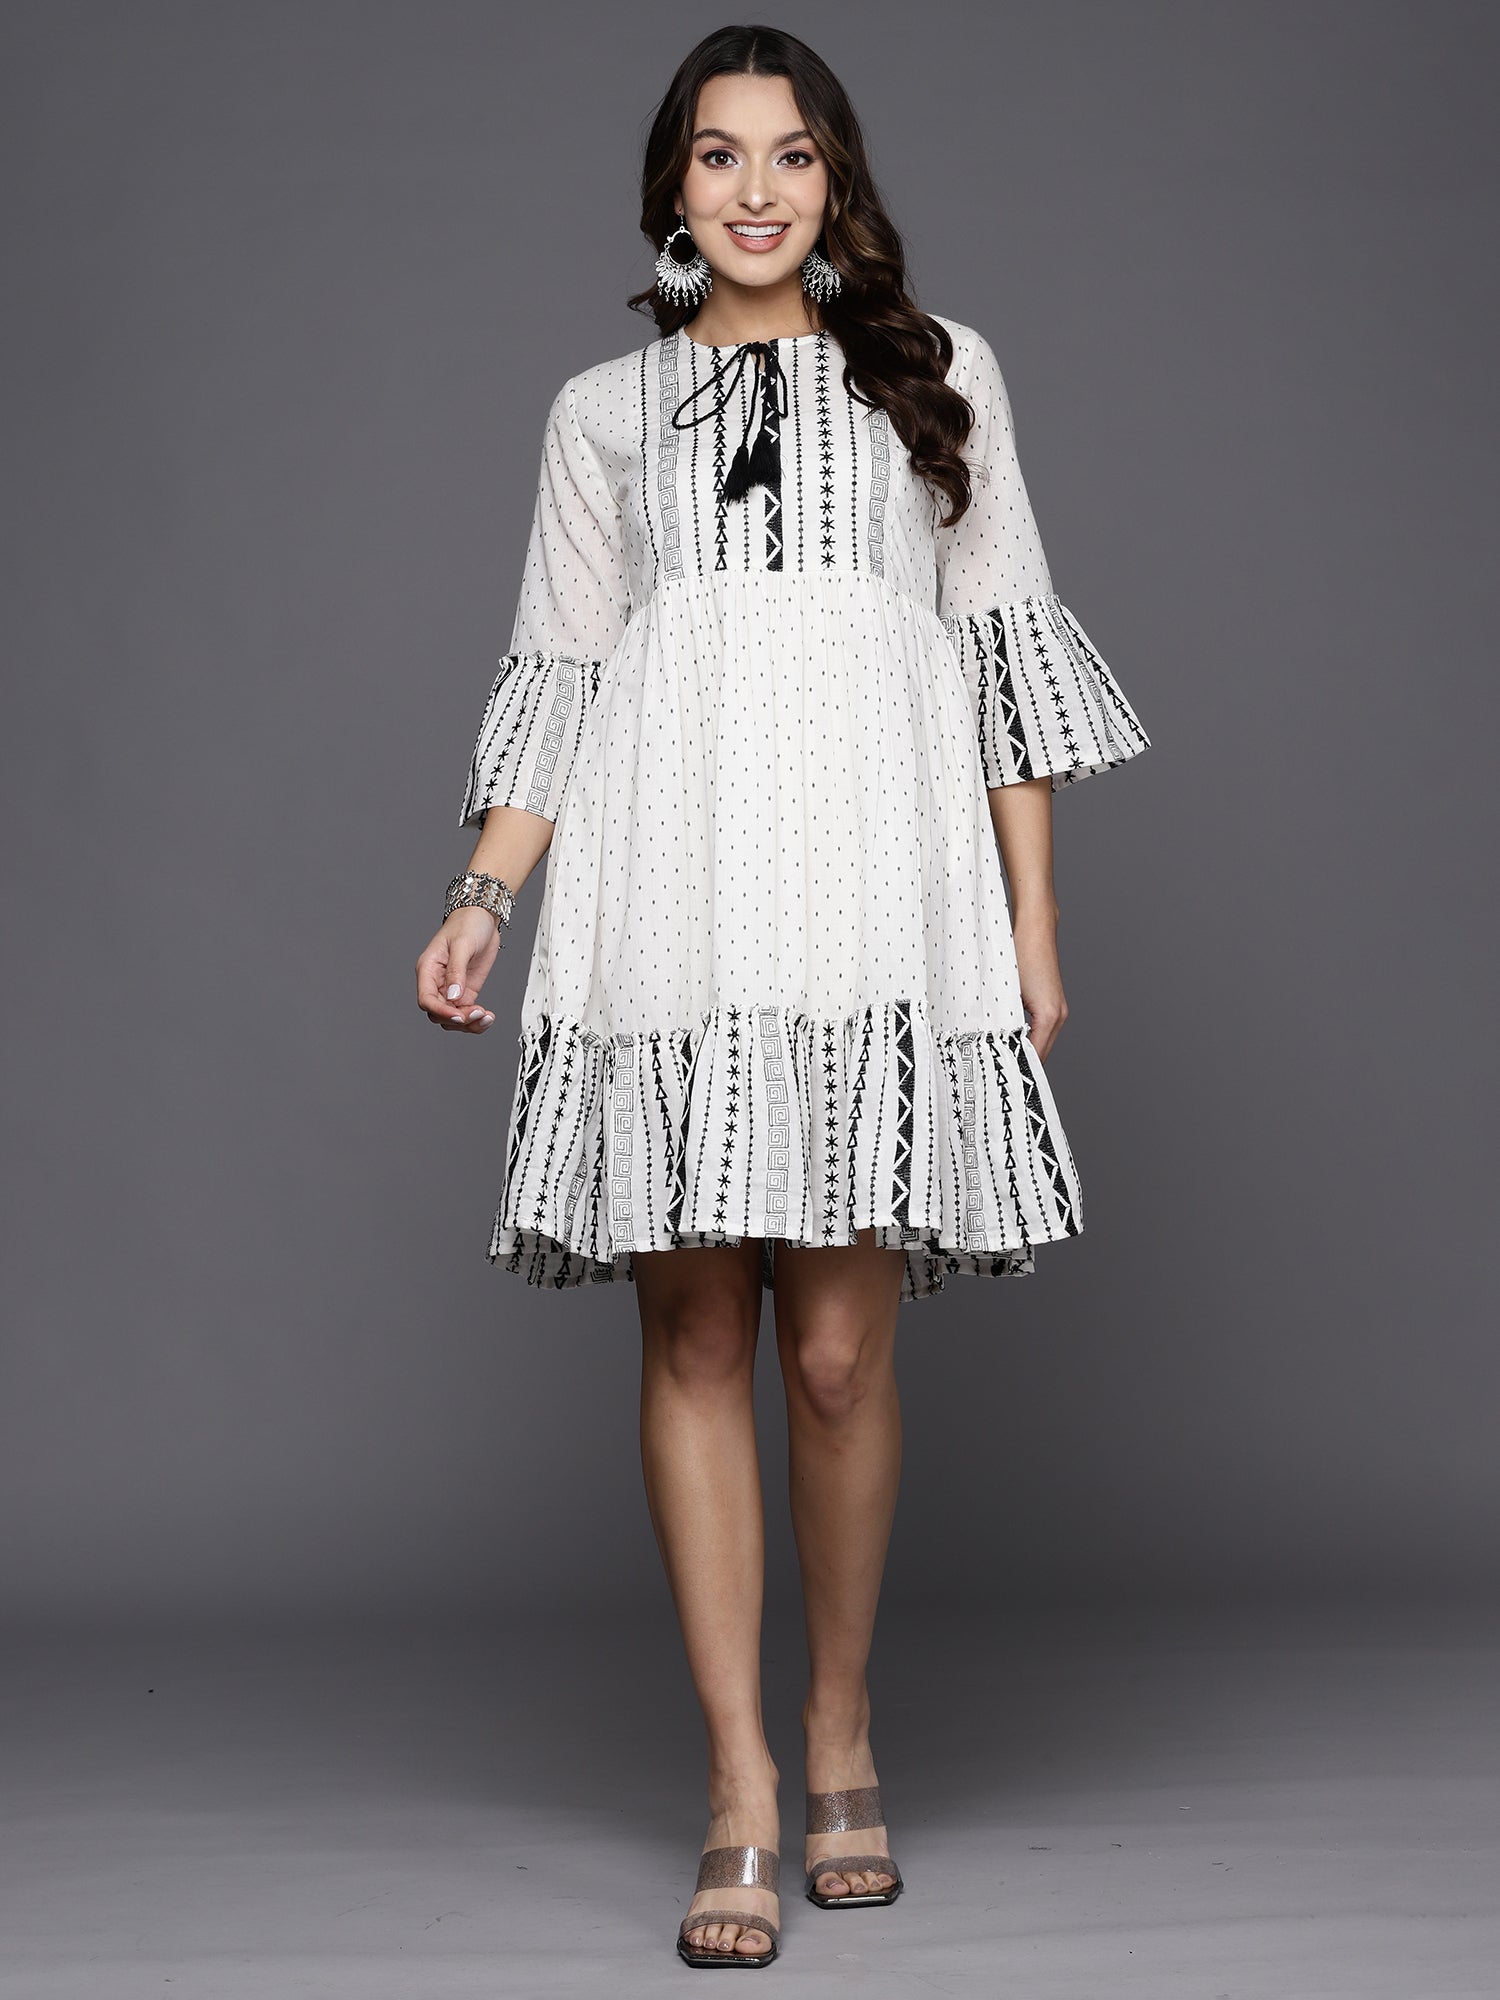 Indo Era White Printed Tie-Up Neck Bell Sleeves A-Line Dress